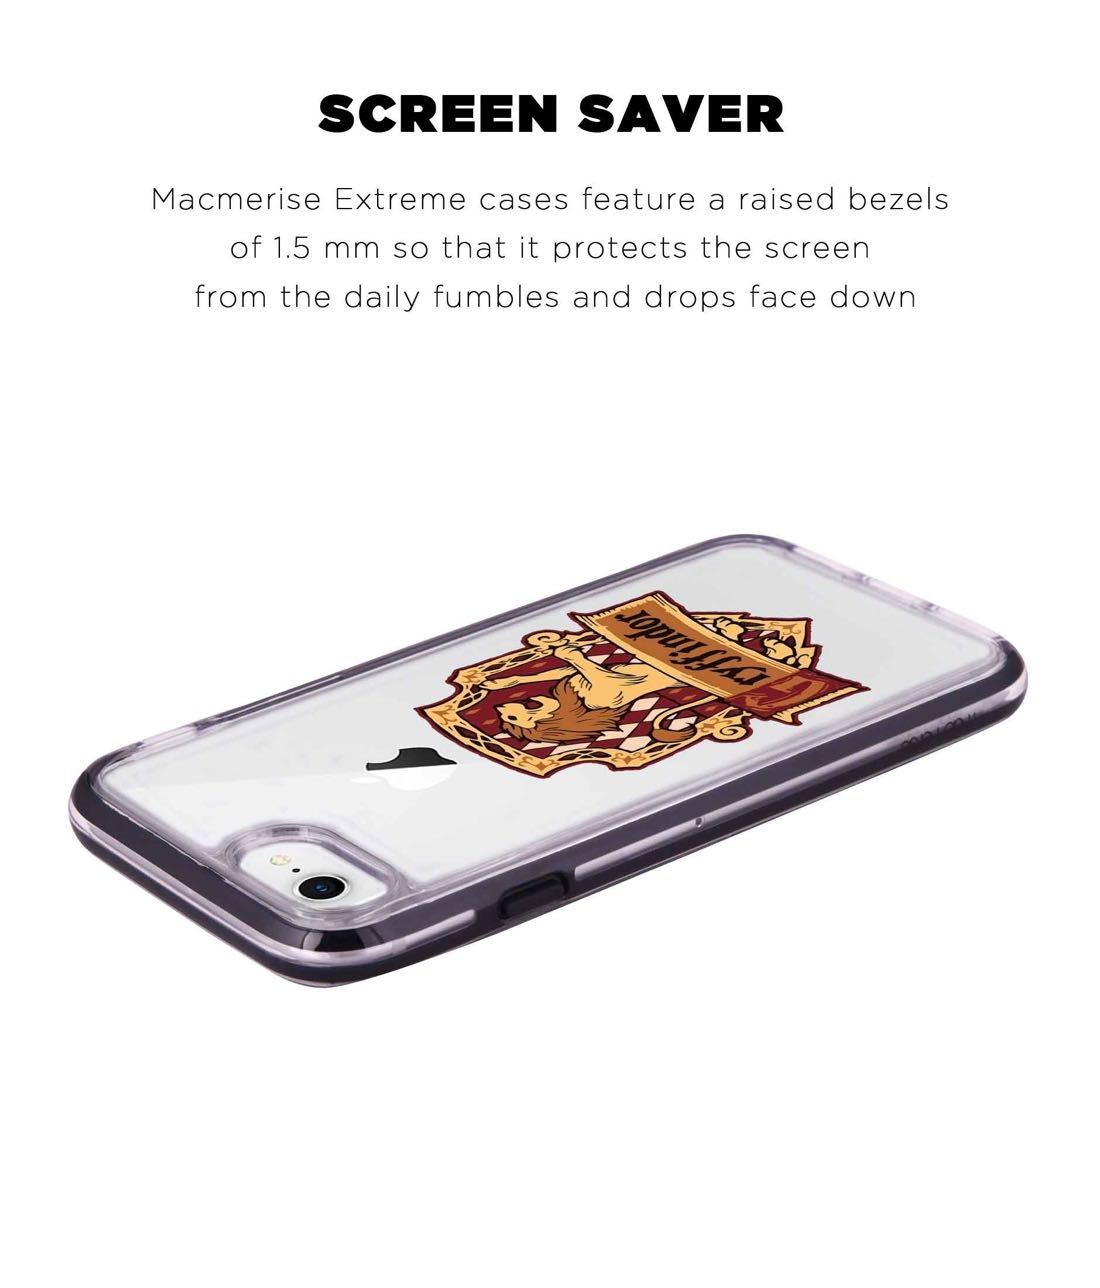 Crest Gryffindor - Extreme Phone Case for iPhone 8